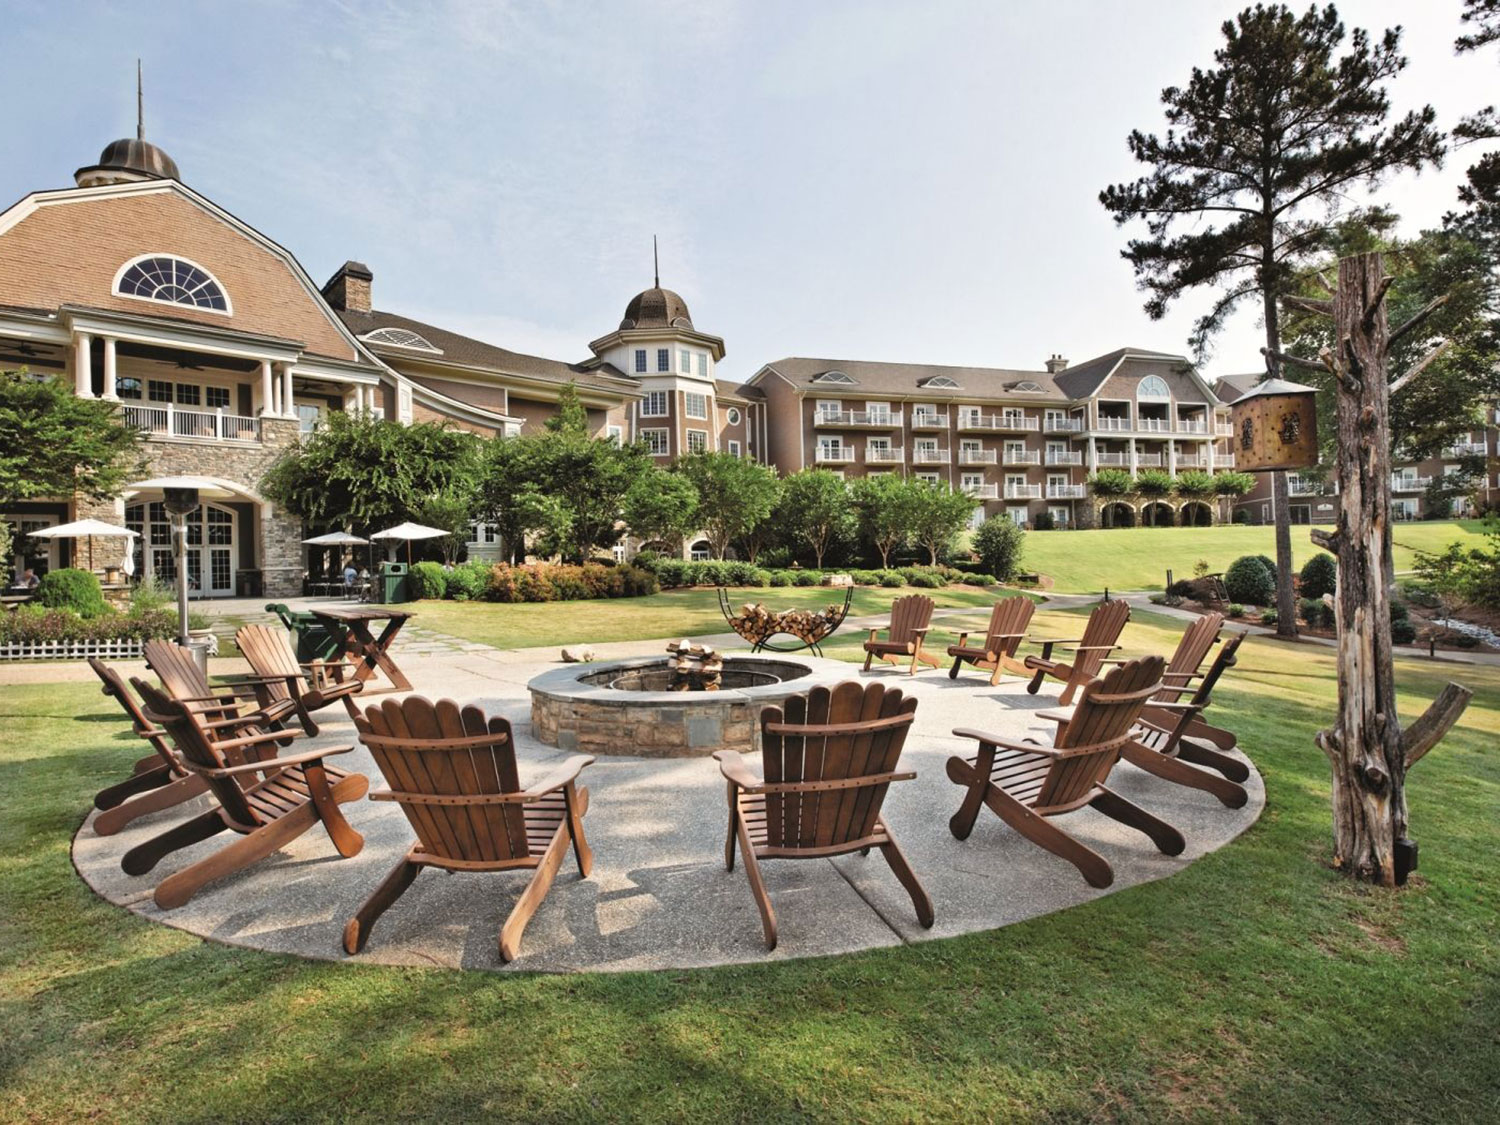 The fire pit seating area at The Ritz-Carlton, Reynolds Lake Oconee, in Georgia.